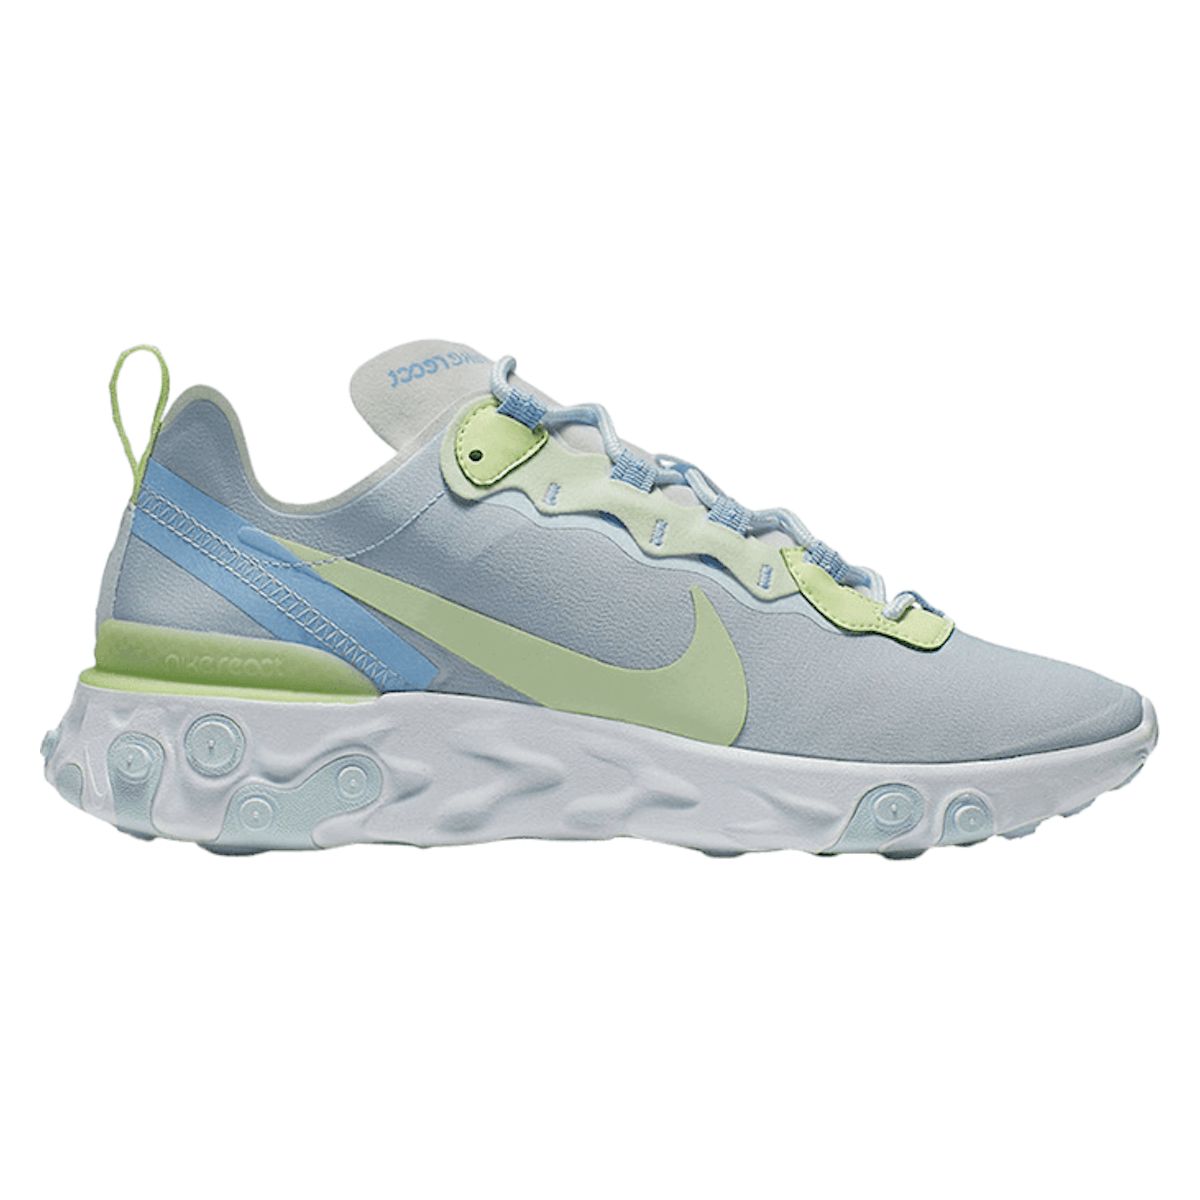 Nike React Element 55 "Frosted Spruce"